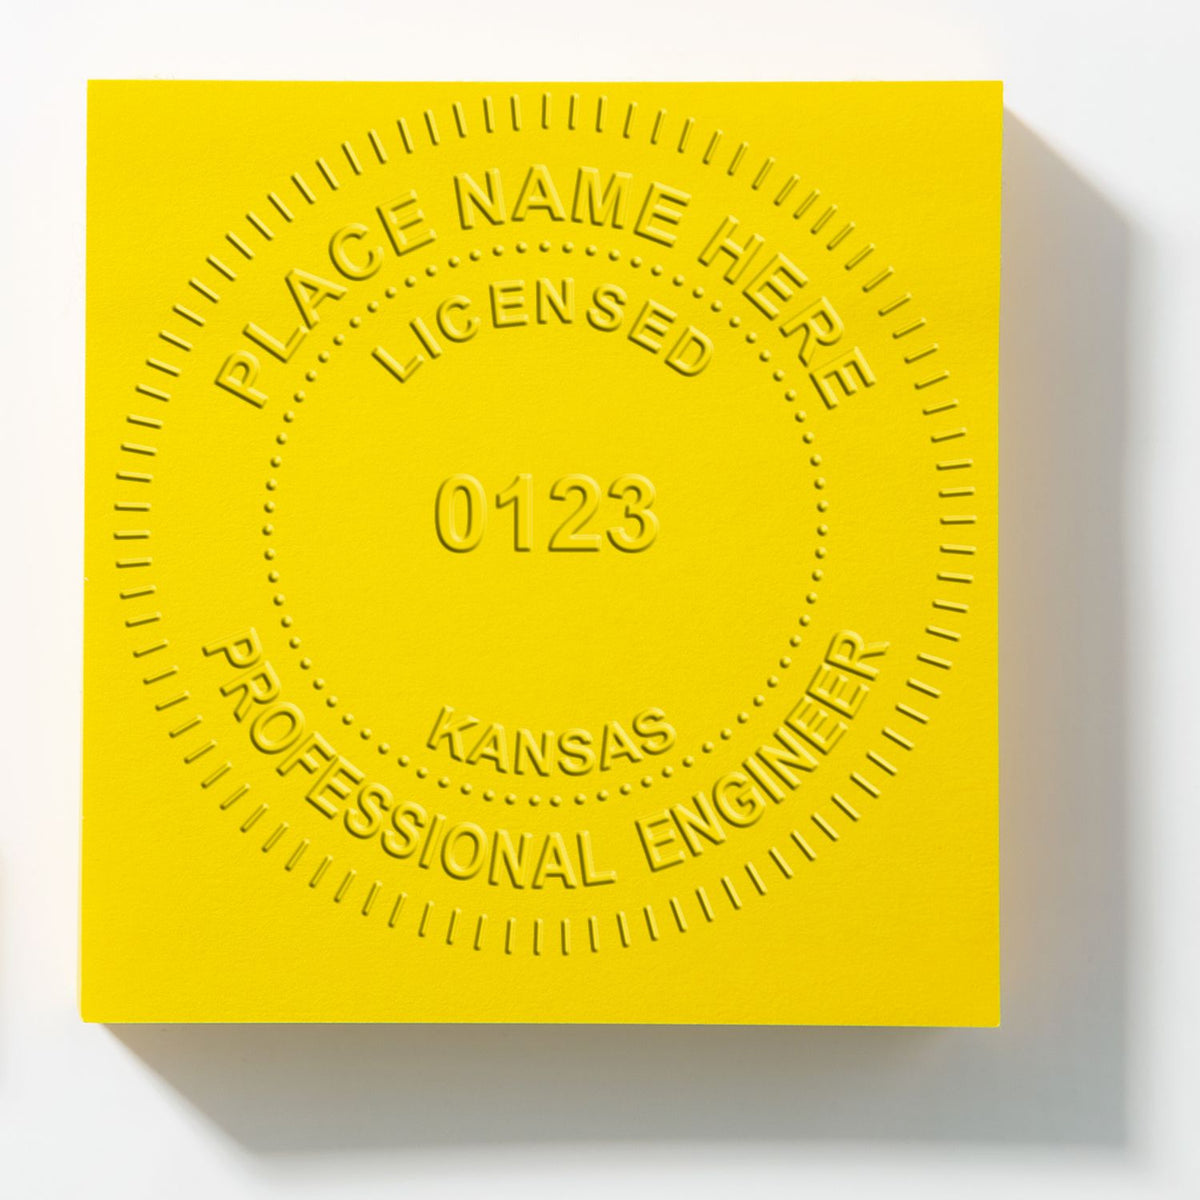 The Handheld Kansas Professional Engineer Embosser stamp impression comes to life with a crisp, detailed photo on paper - showcasing true professional quality.